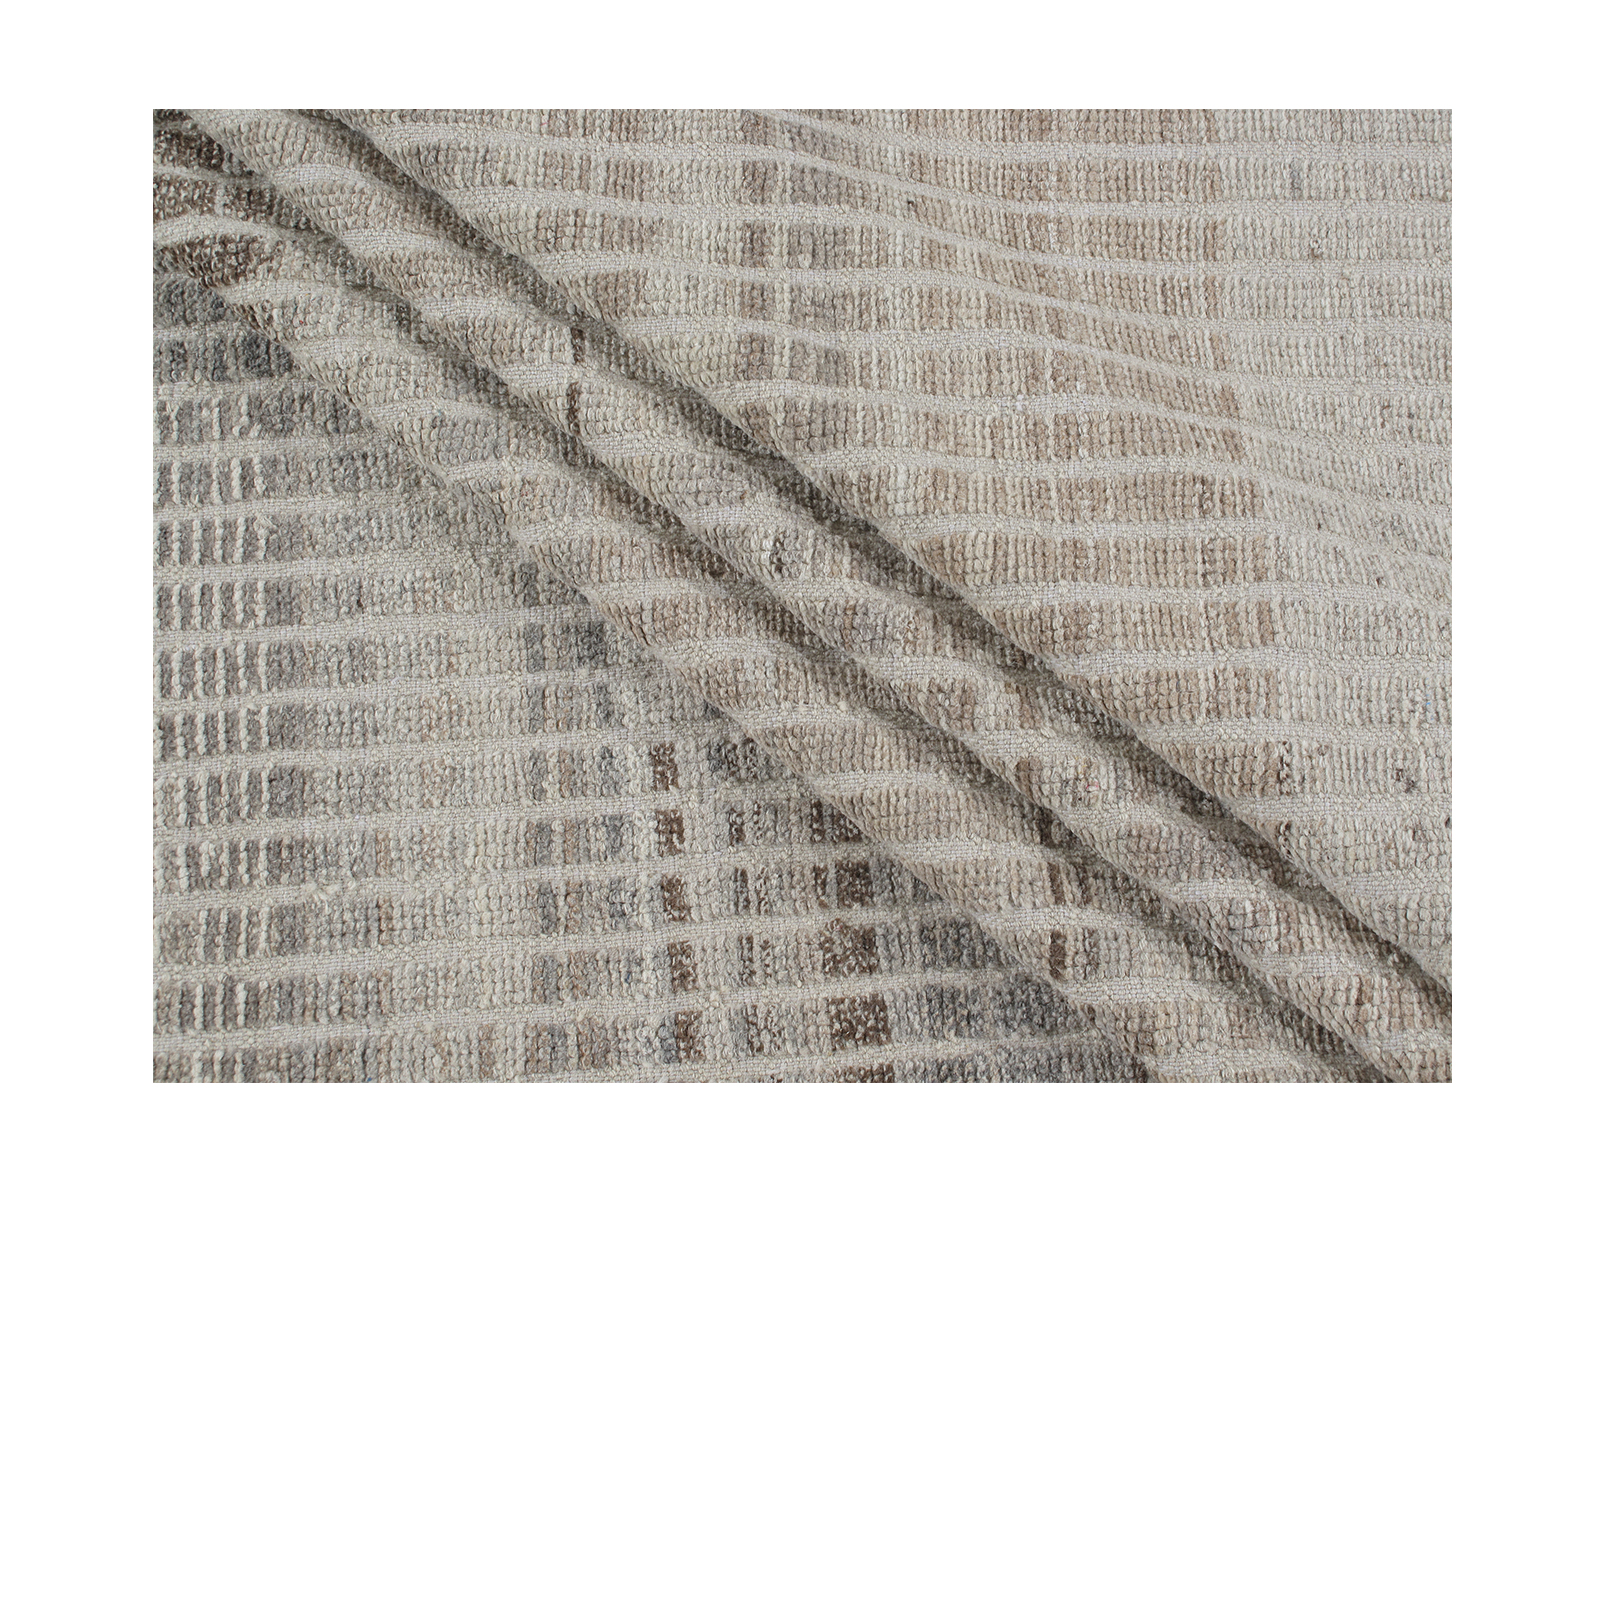 Our African rug  is hand-knotted, and made from the finest hand-carded, hand-spun naturally dyed wool with silk accent. 